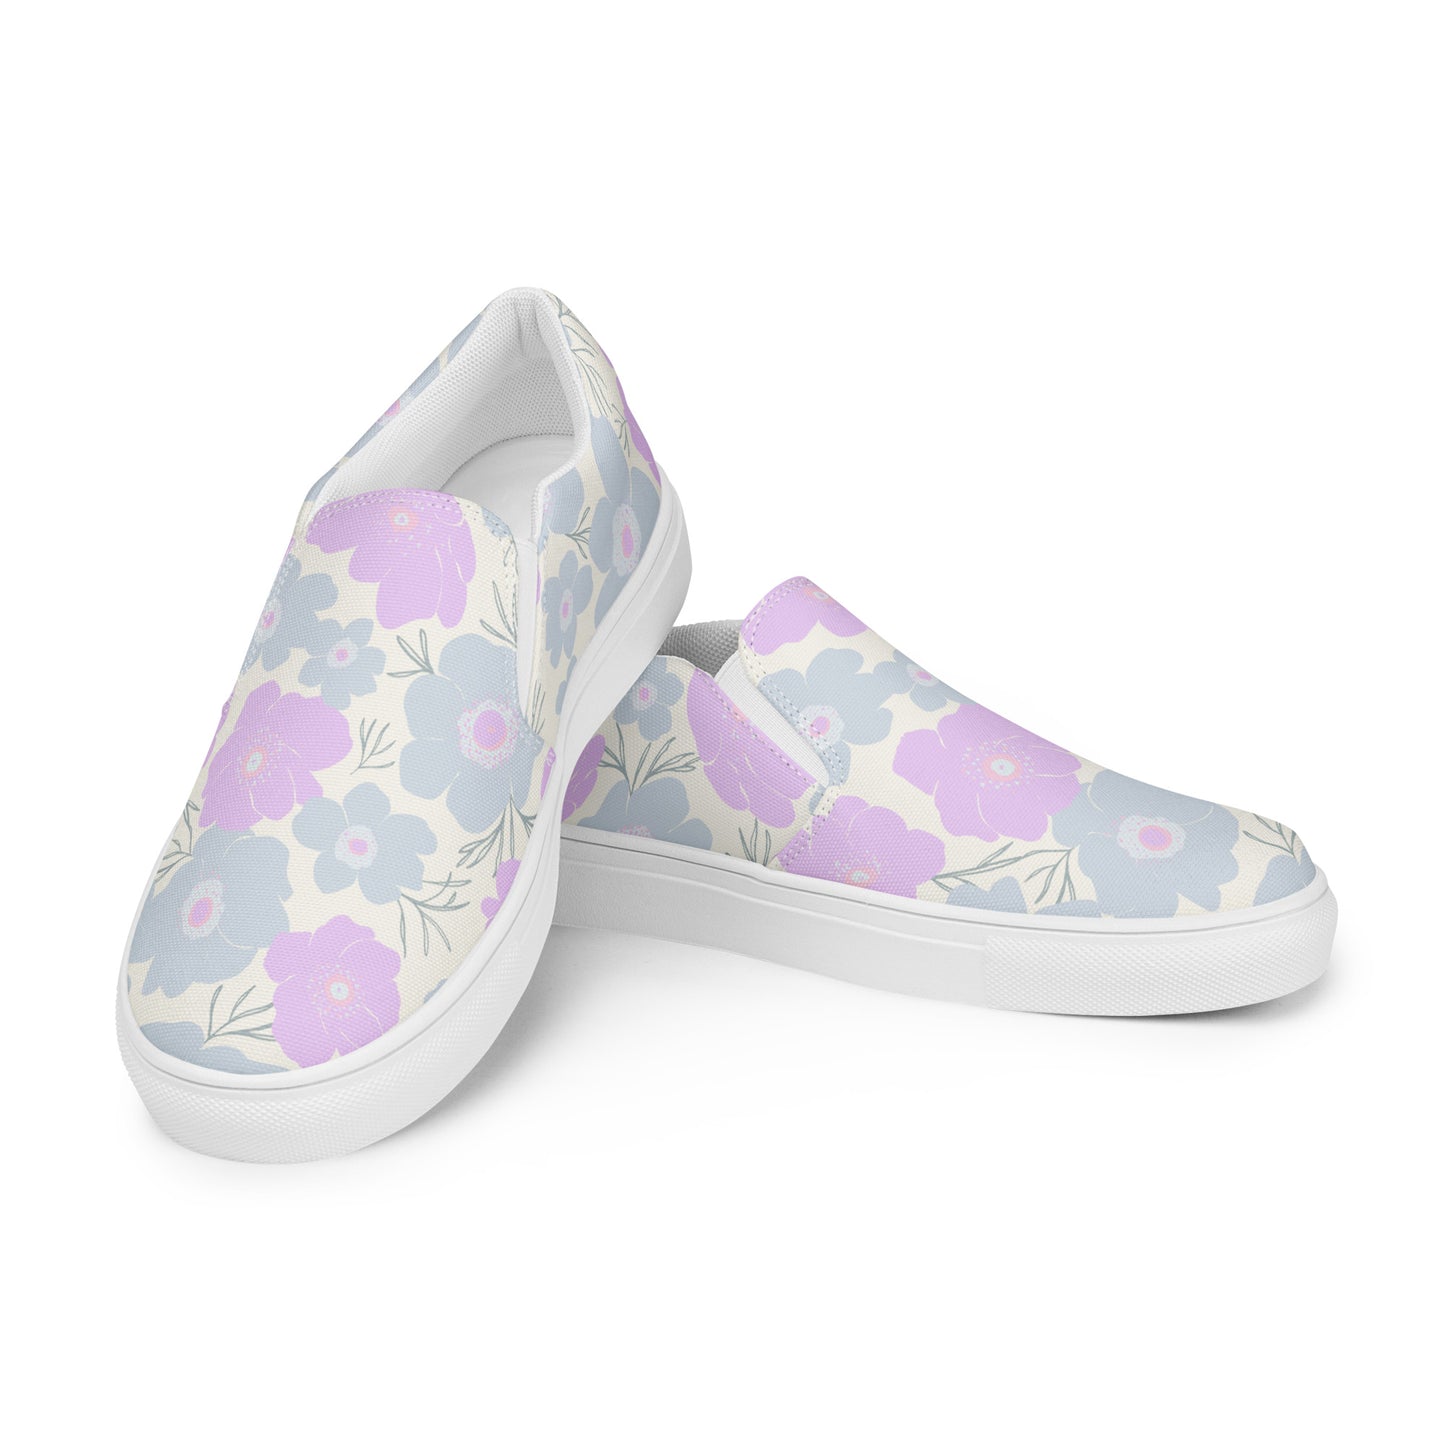 Pastel Floral - Sustainably Made Women's  Slip-On Canvas Shoes